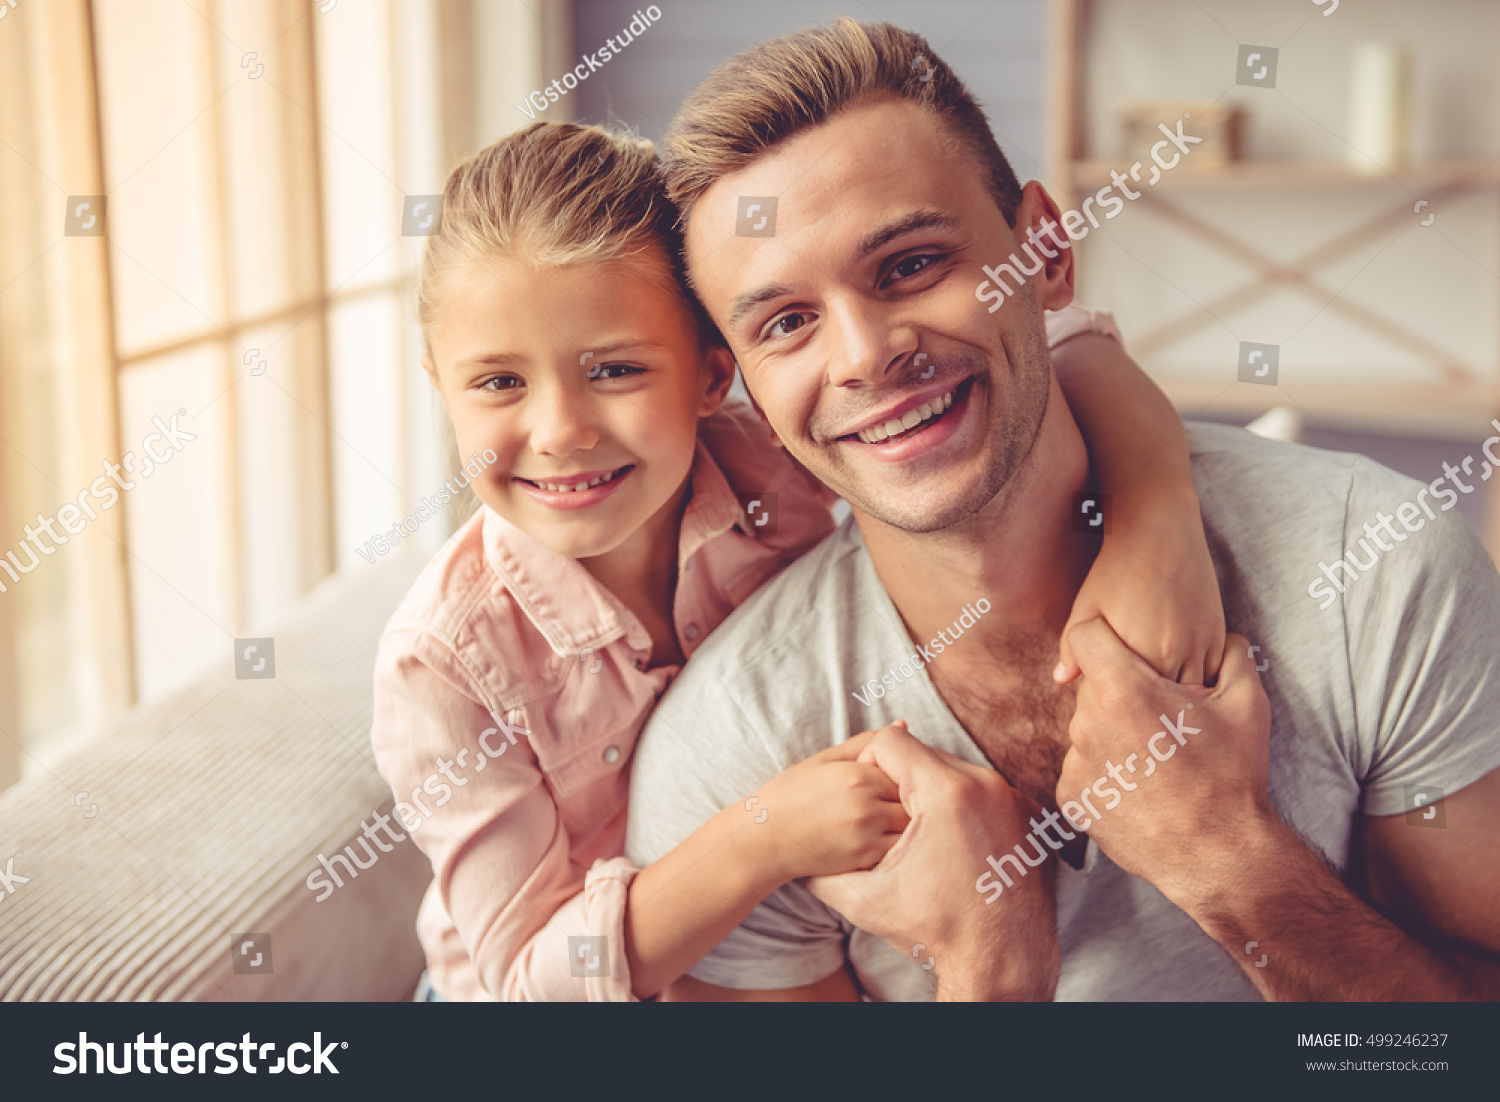 Portrait of handsome young father and his little daughter hugging, looking at camera and smiling while sitting on sofa at home #499246237